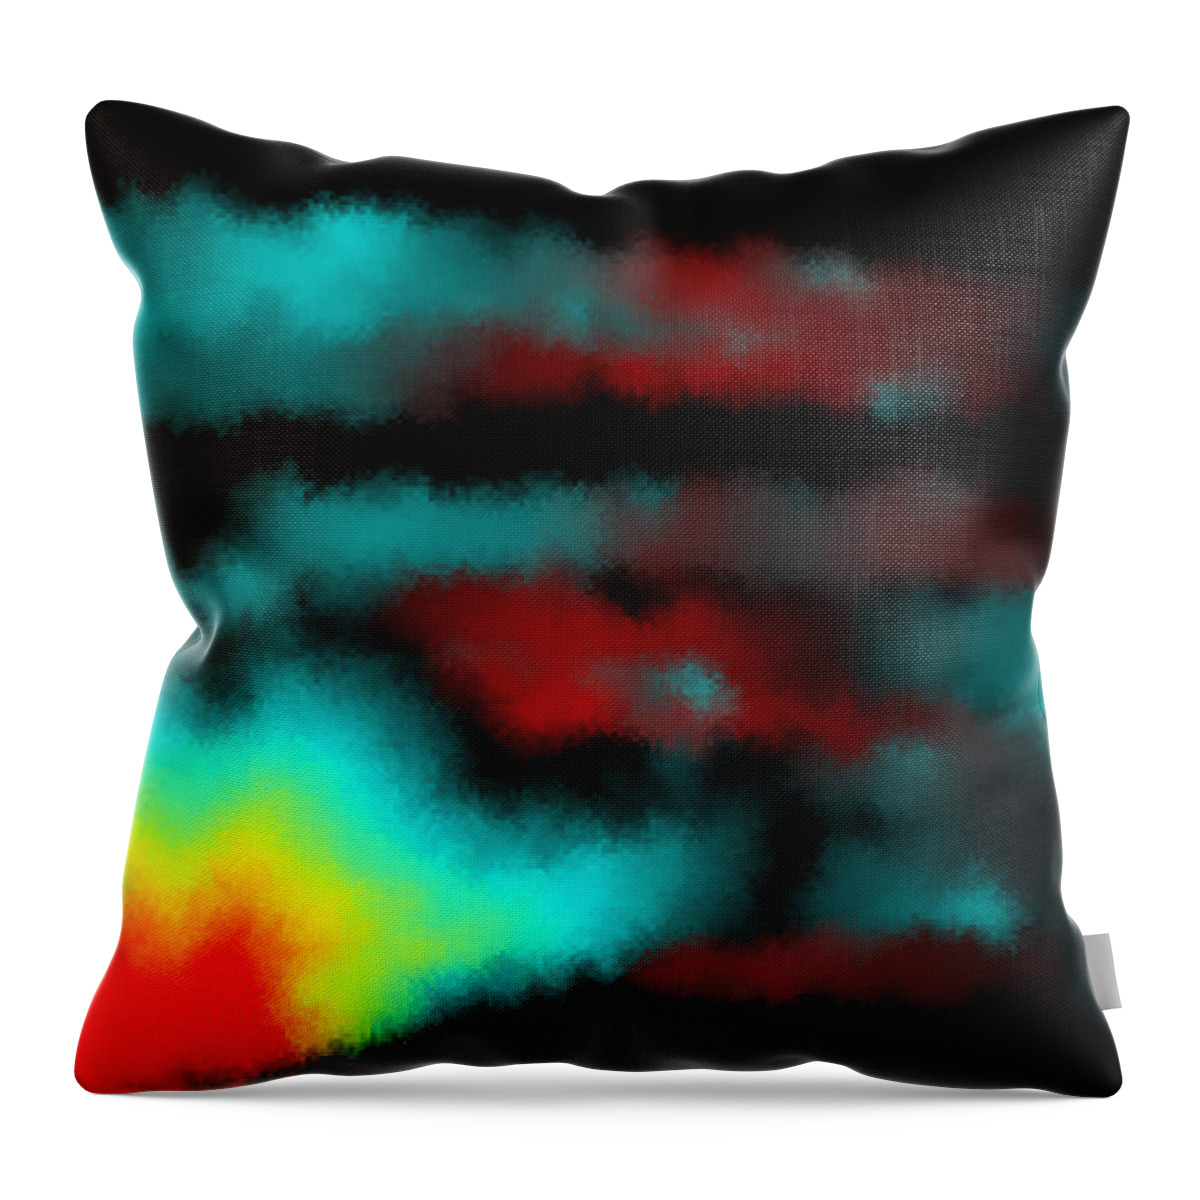 Rithmart Abstract Fade Fading Pixels Noise Clouds Organic Shades Random Computer Digital Shapes Changing Directions Large Pixels Shades Throw Pillow featuring the digital art 18x9.249-#rithmart by Gareth Lewis